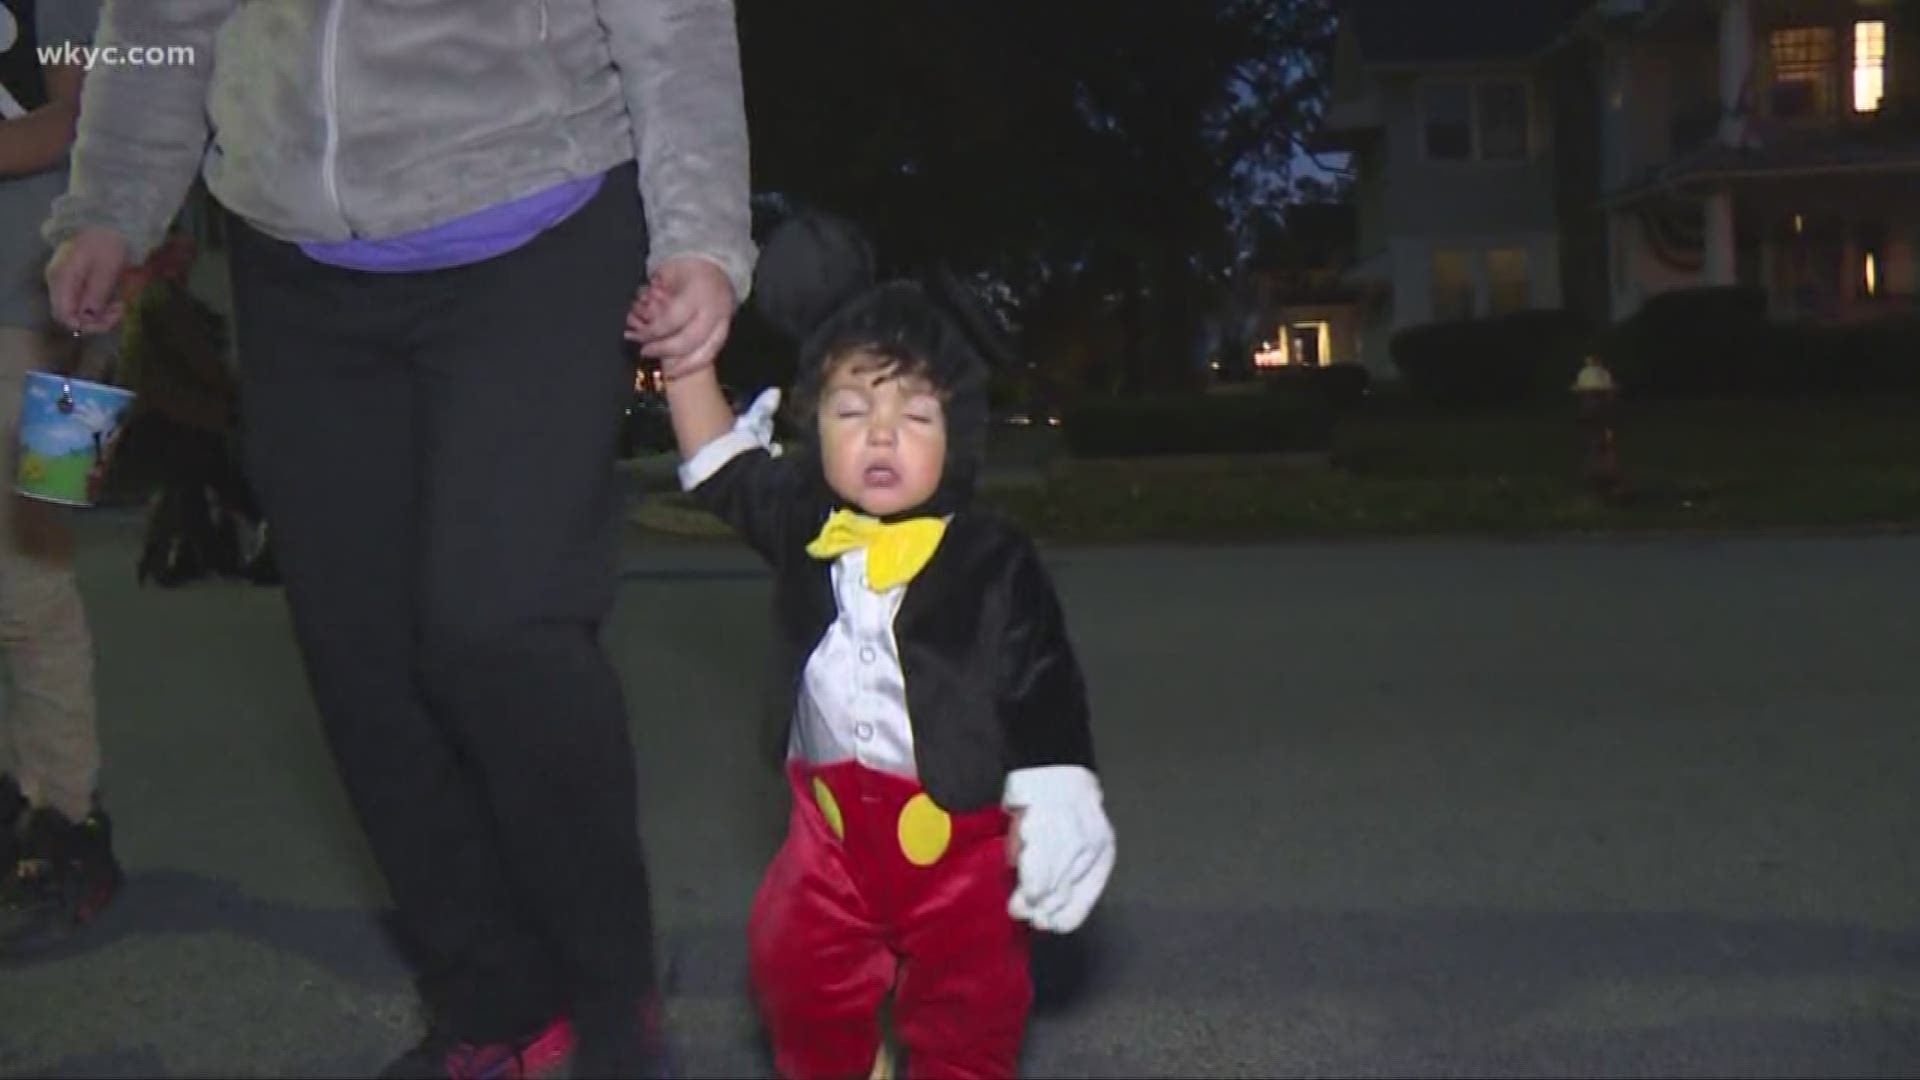 Kids trick or treating over the age of 12 could face fines or even jail time 